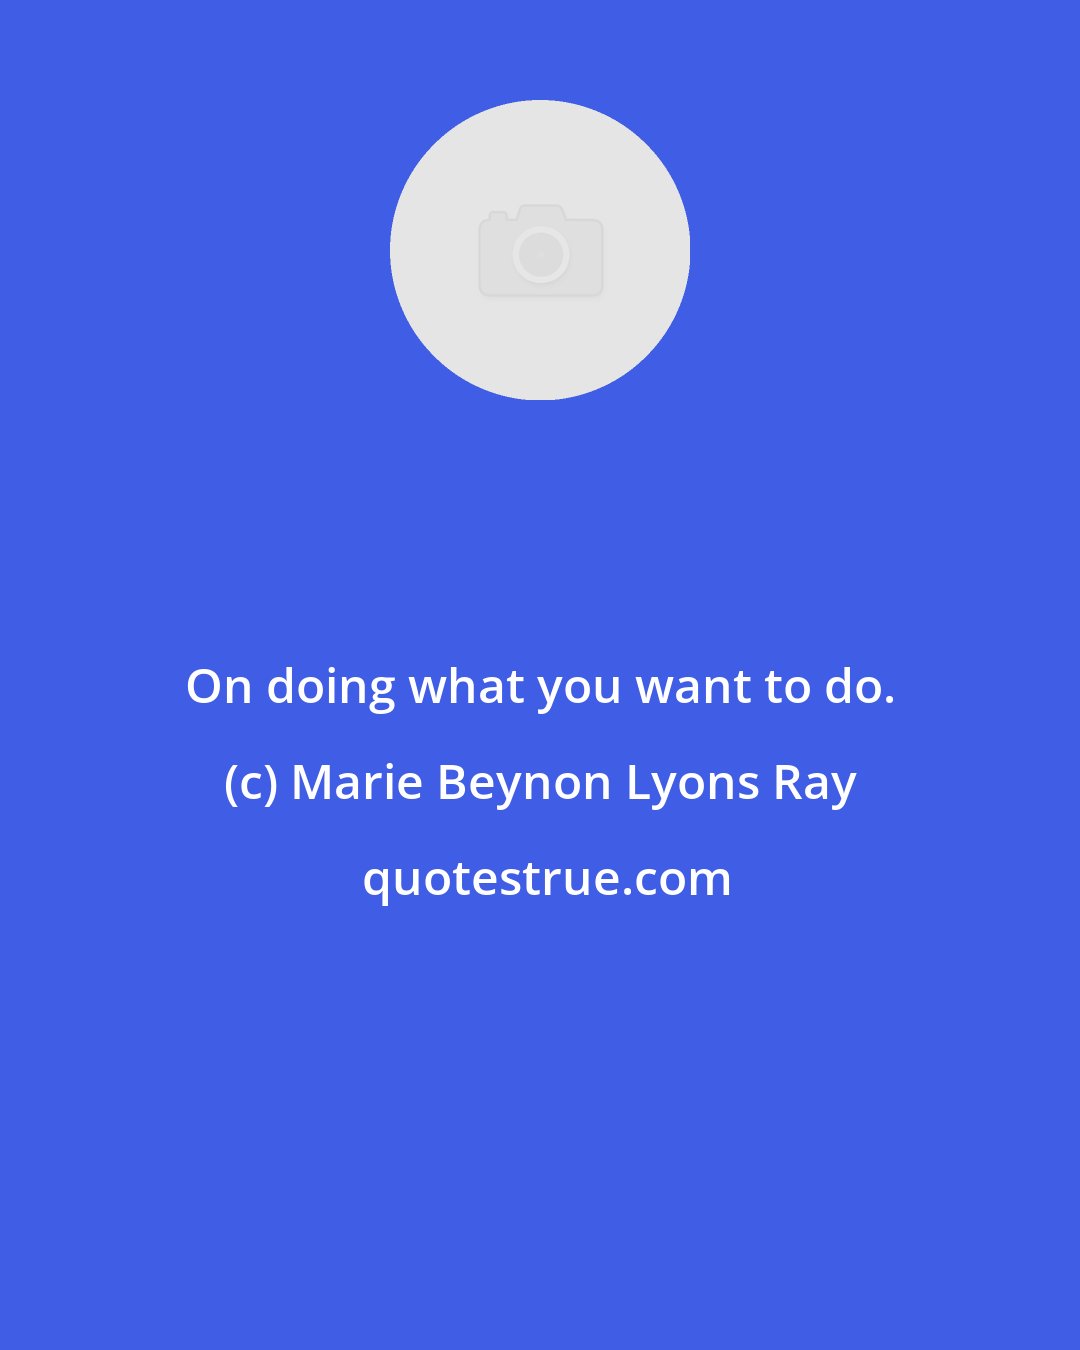 Marie Beynon Lyons Ray: On doing what you want to do.